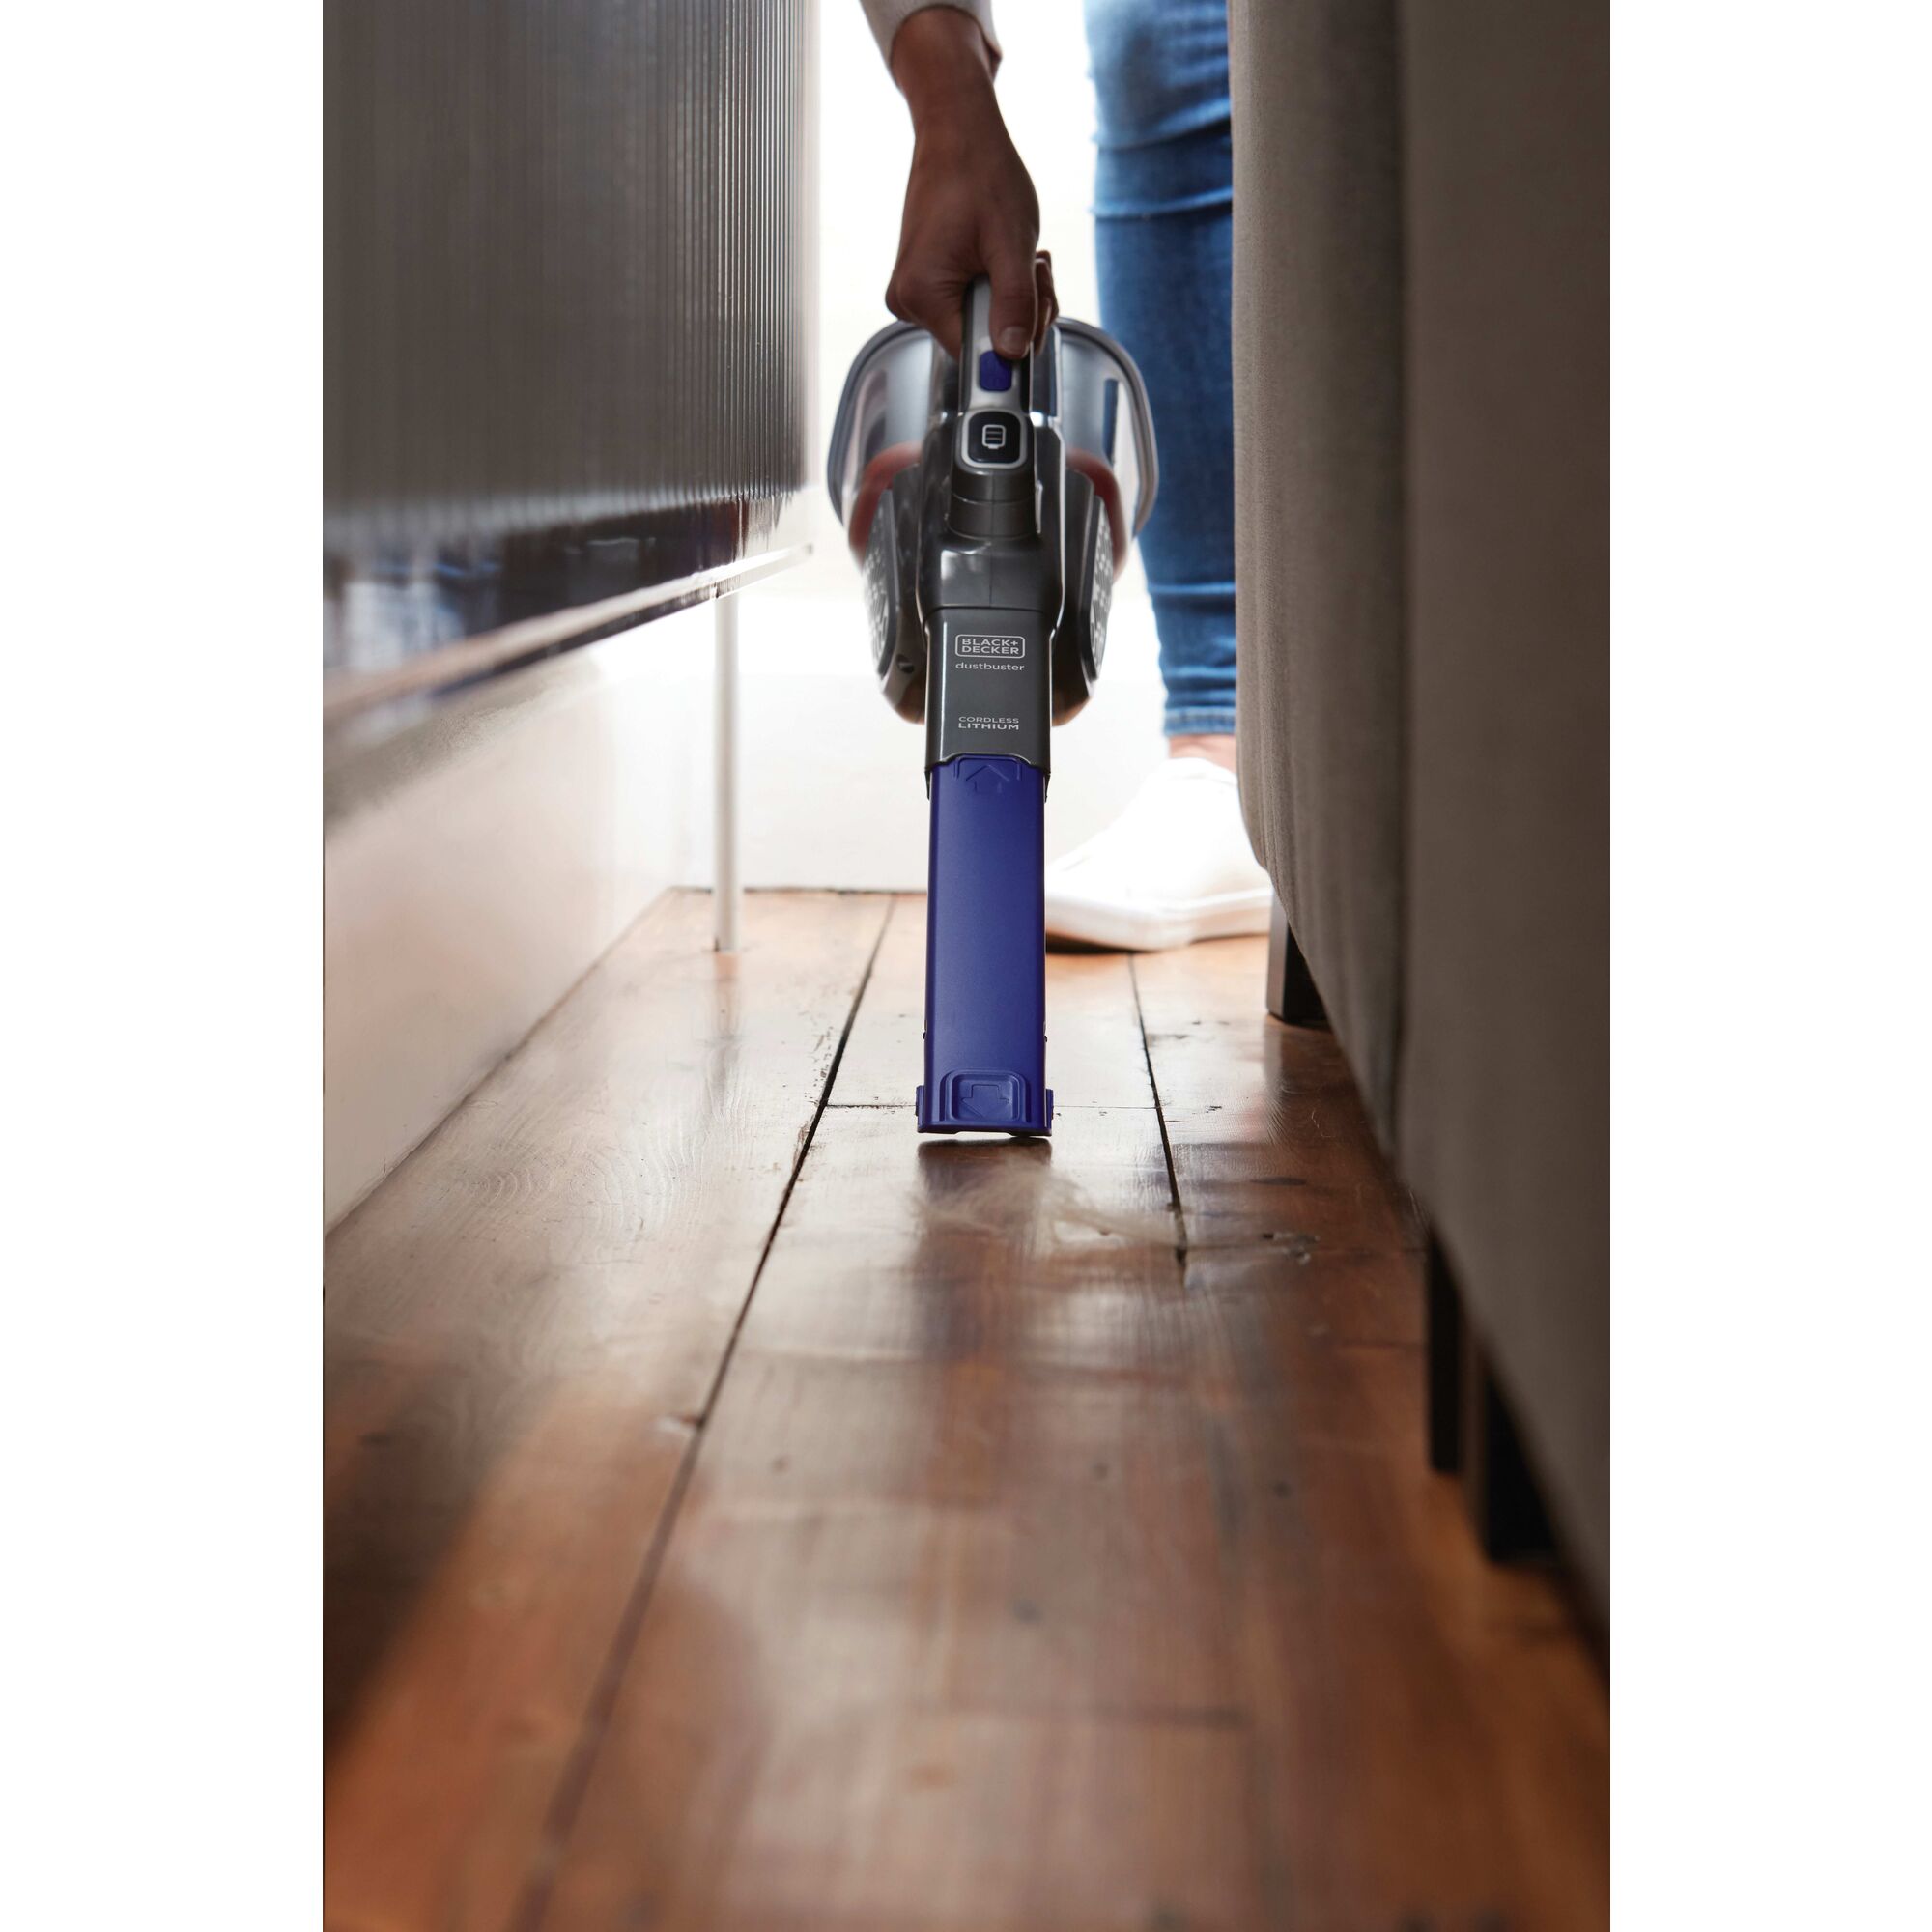 Dustbuster advanced clean plus pet hand vacuum with base charger and extra filter cleaning floor.